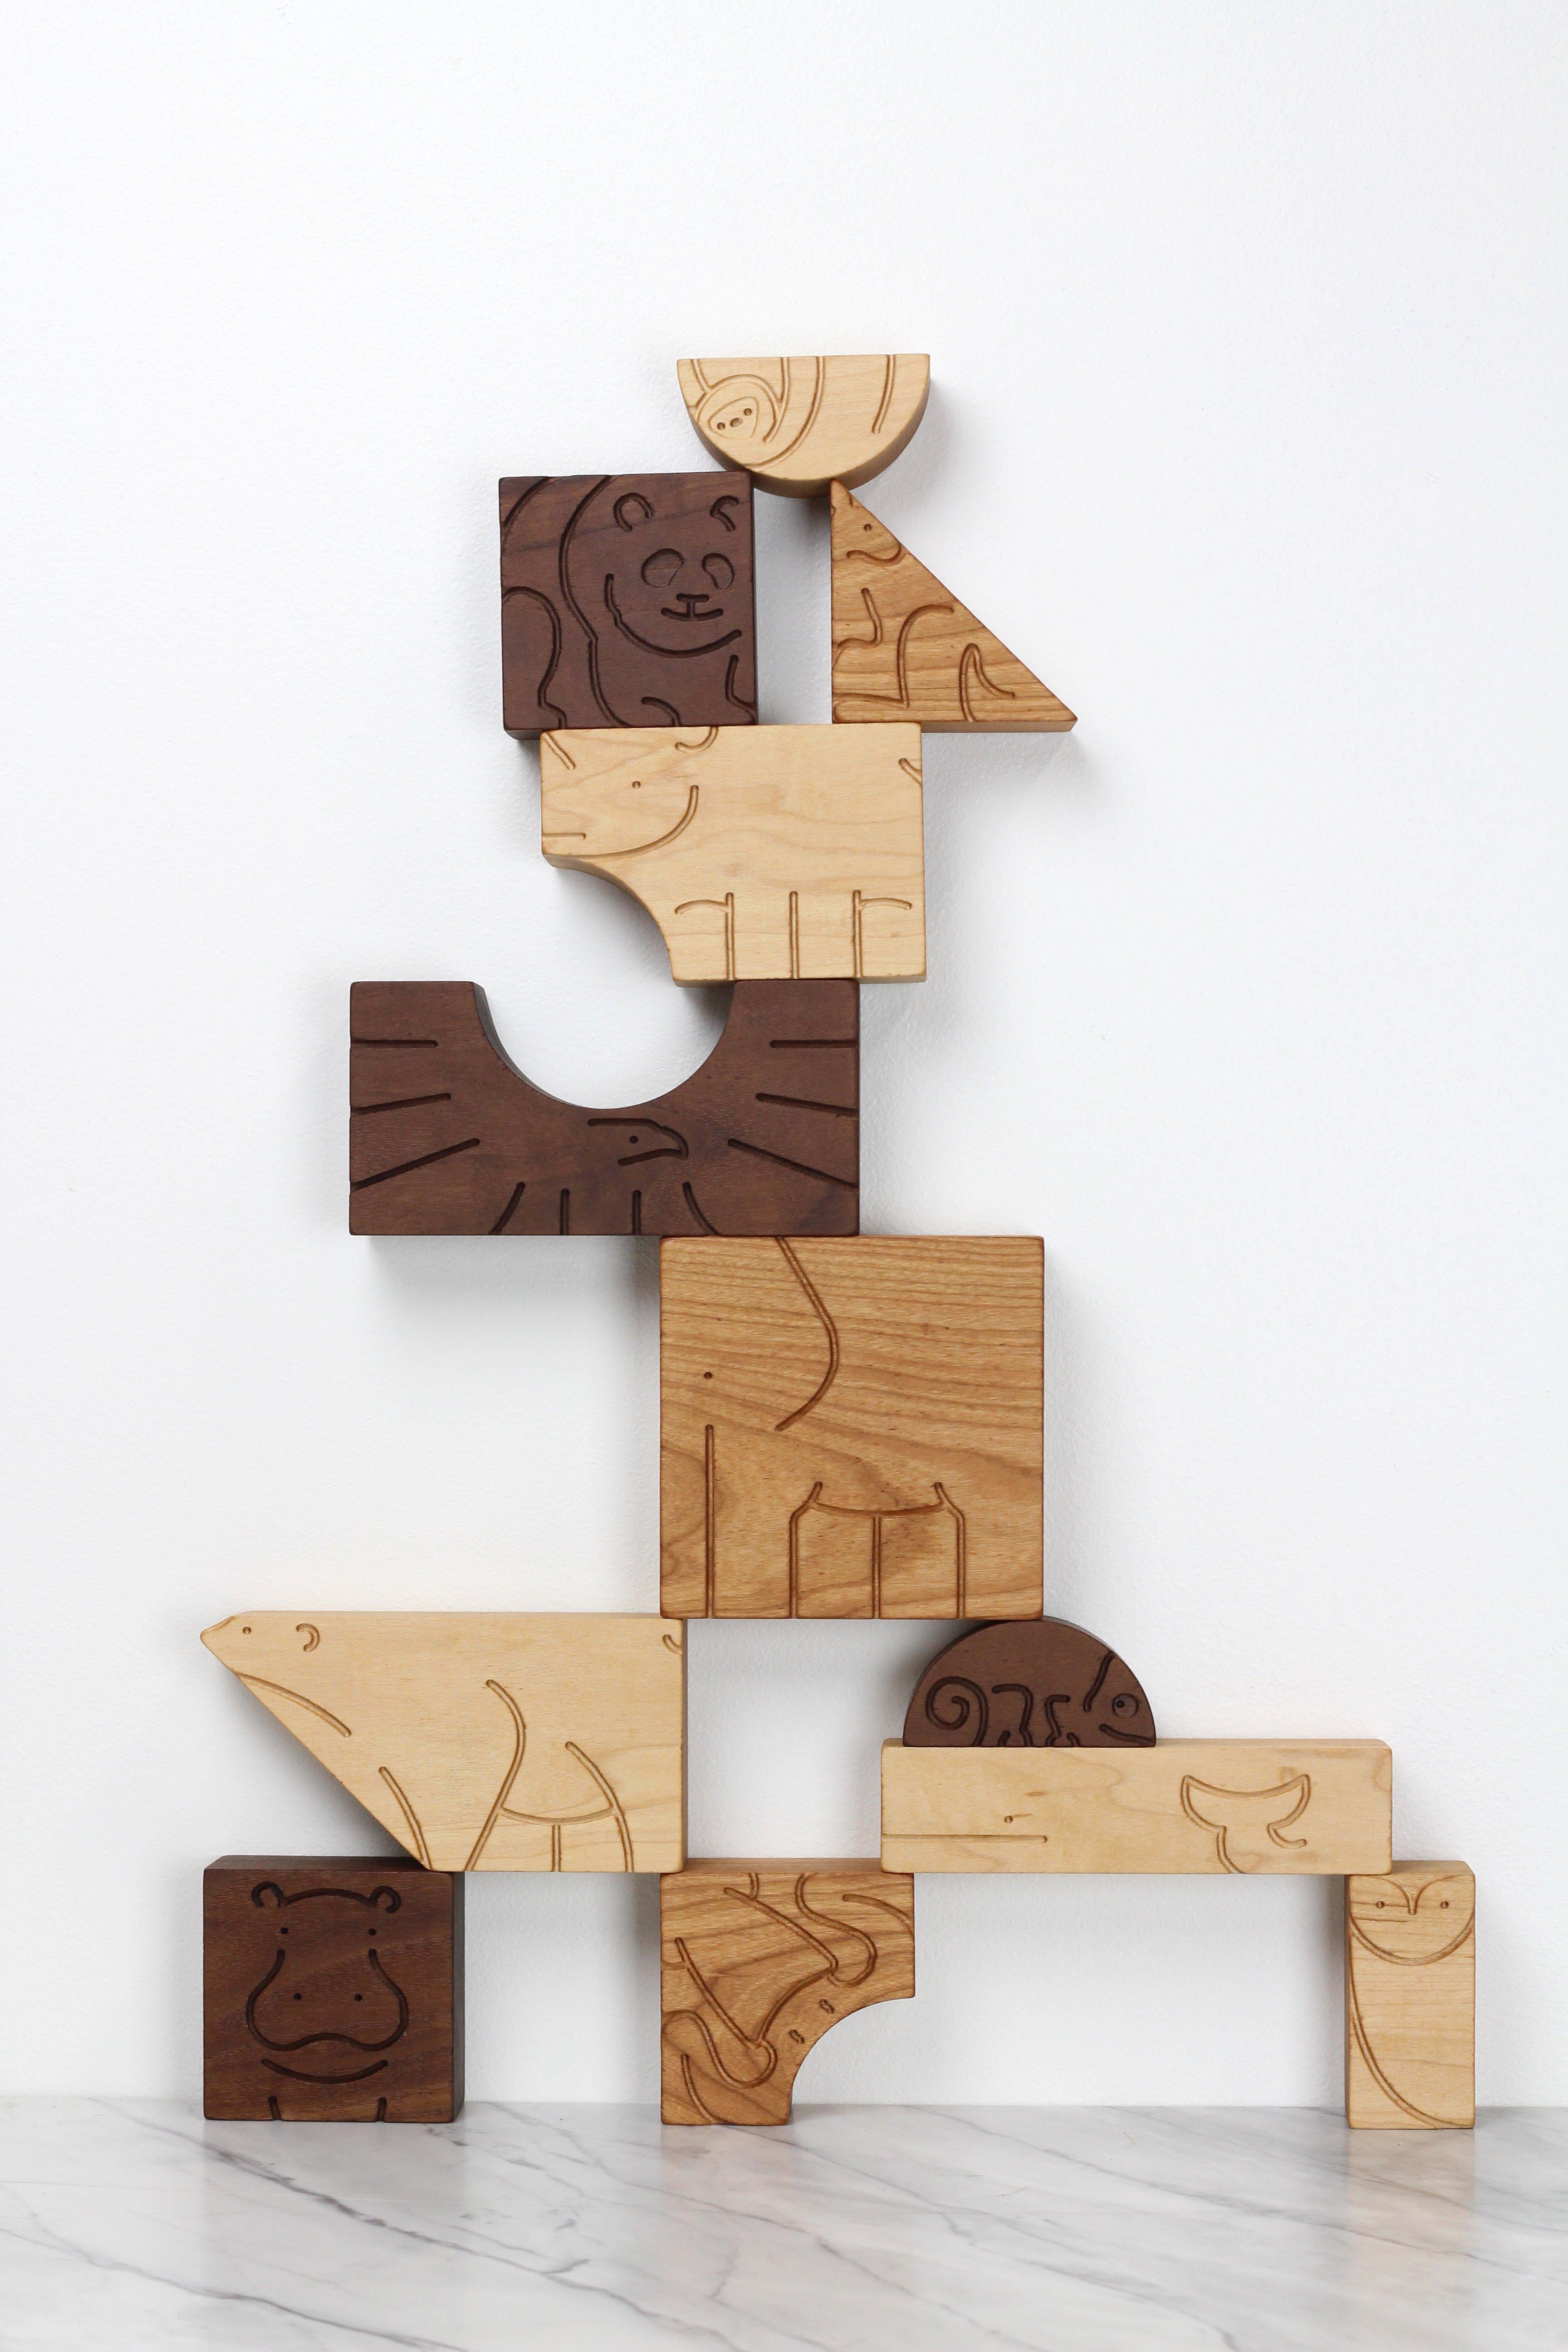 Crafted from maple, cherry, and walnut, the “Aminal” Blocks set contains 12 unique animal sculptures. The set includes an owl, hippo, kangaroo, polar bear, squid, chameleon, rhino, panda, eagle, sloth, whale, and elephant.

The set derives its